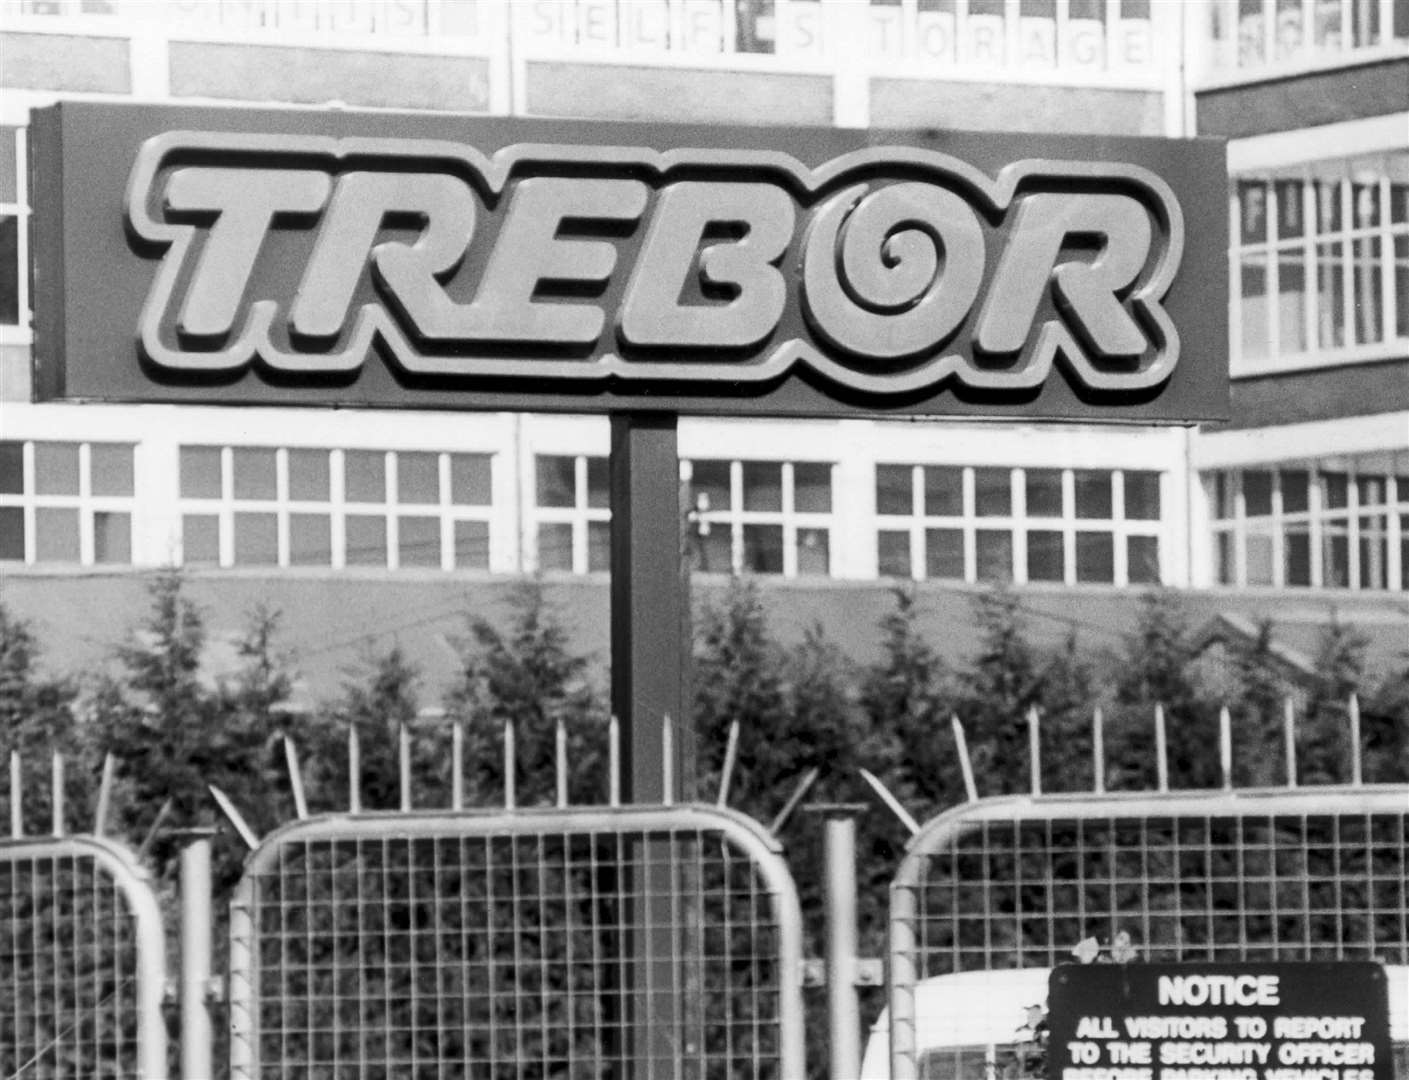 The Trebor sweets factory in Maidstone in 1989. It closed in 2000